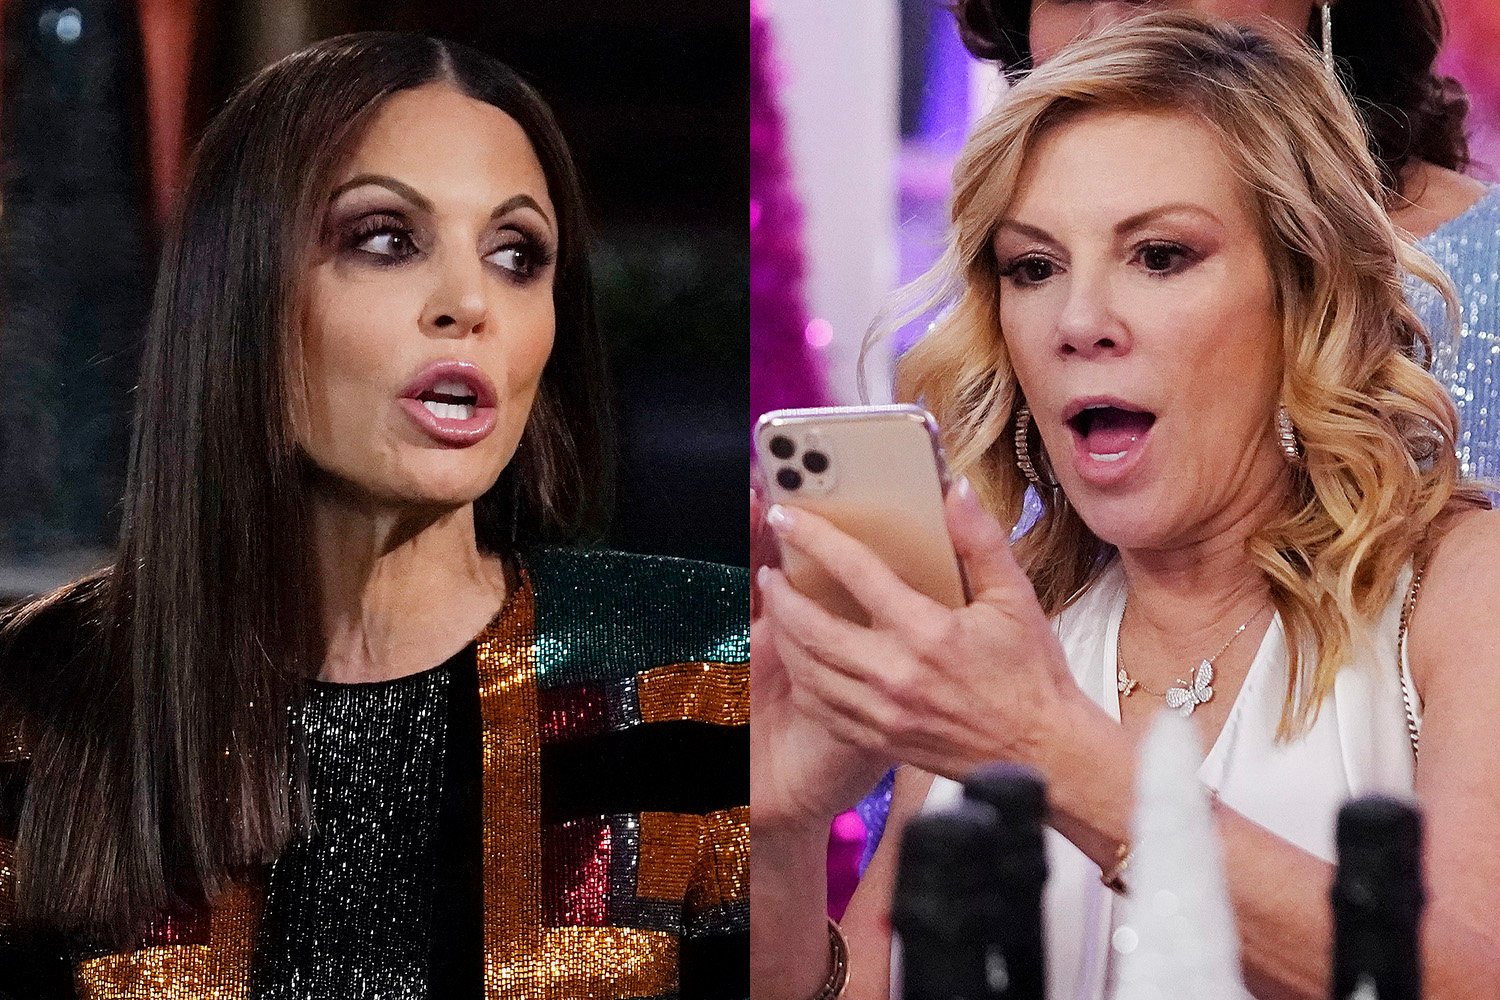 ‘RHONY’: Ramona Singer Slams Bethenny Frankel for ‘Calculated’ Move Against Show